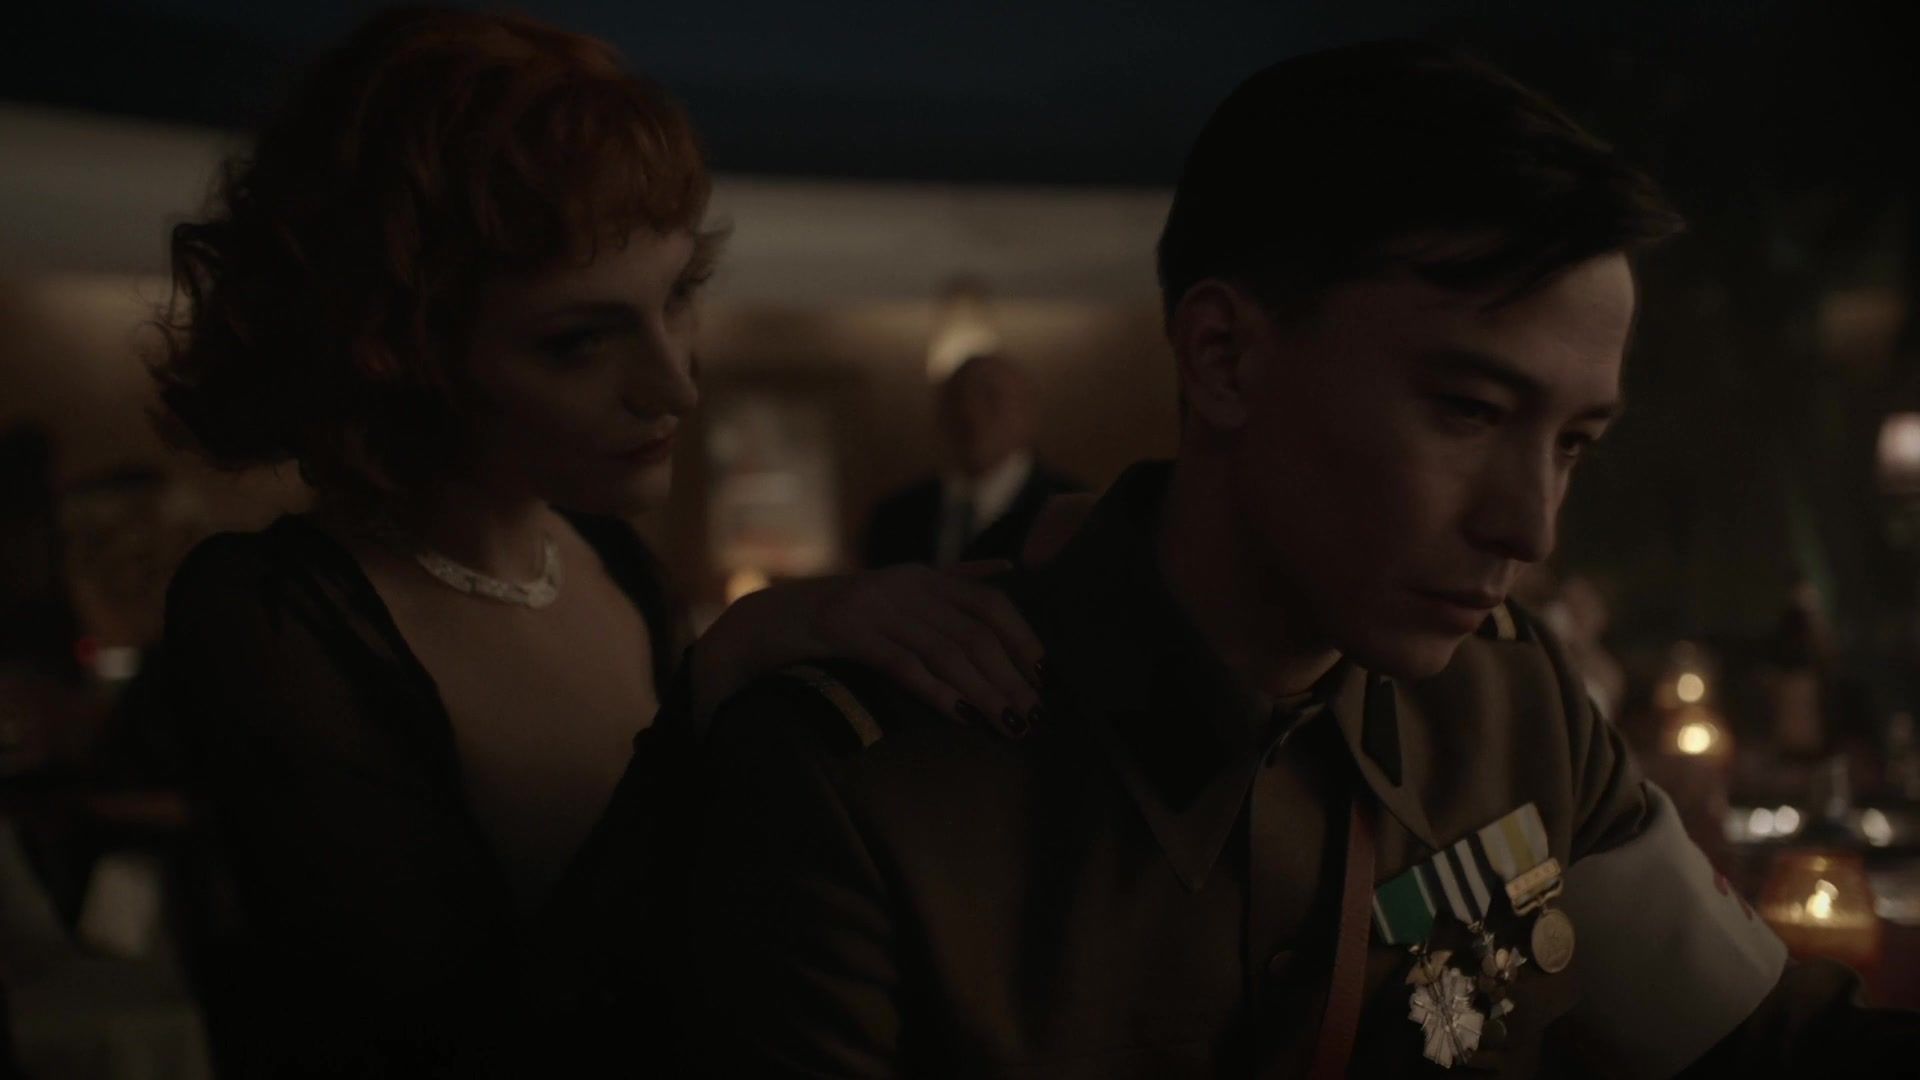 TagSlut Nude Destiny Millns - The Man in the High Castle s04e03 (2019) Pick Up